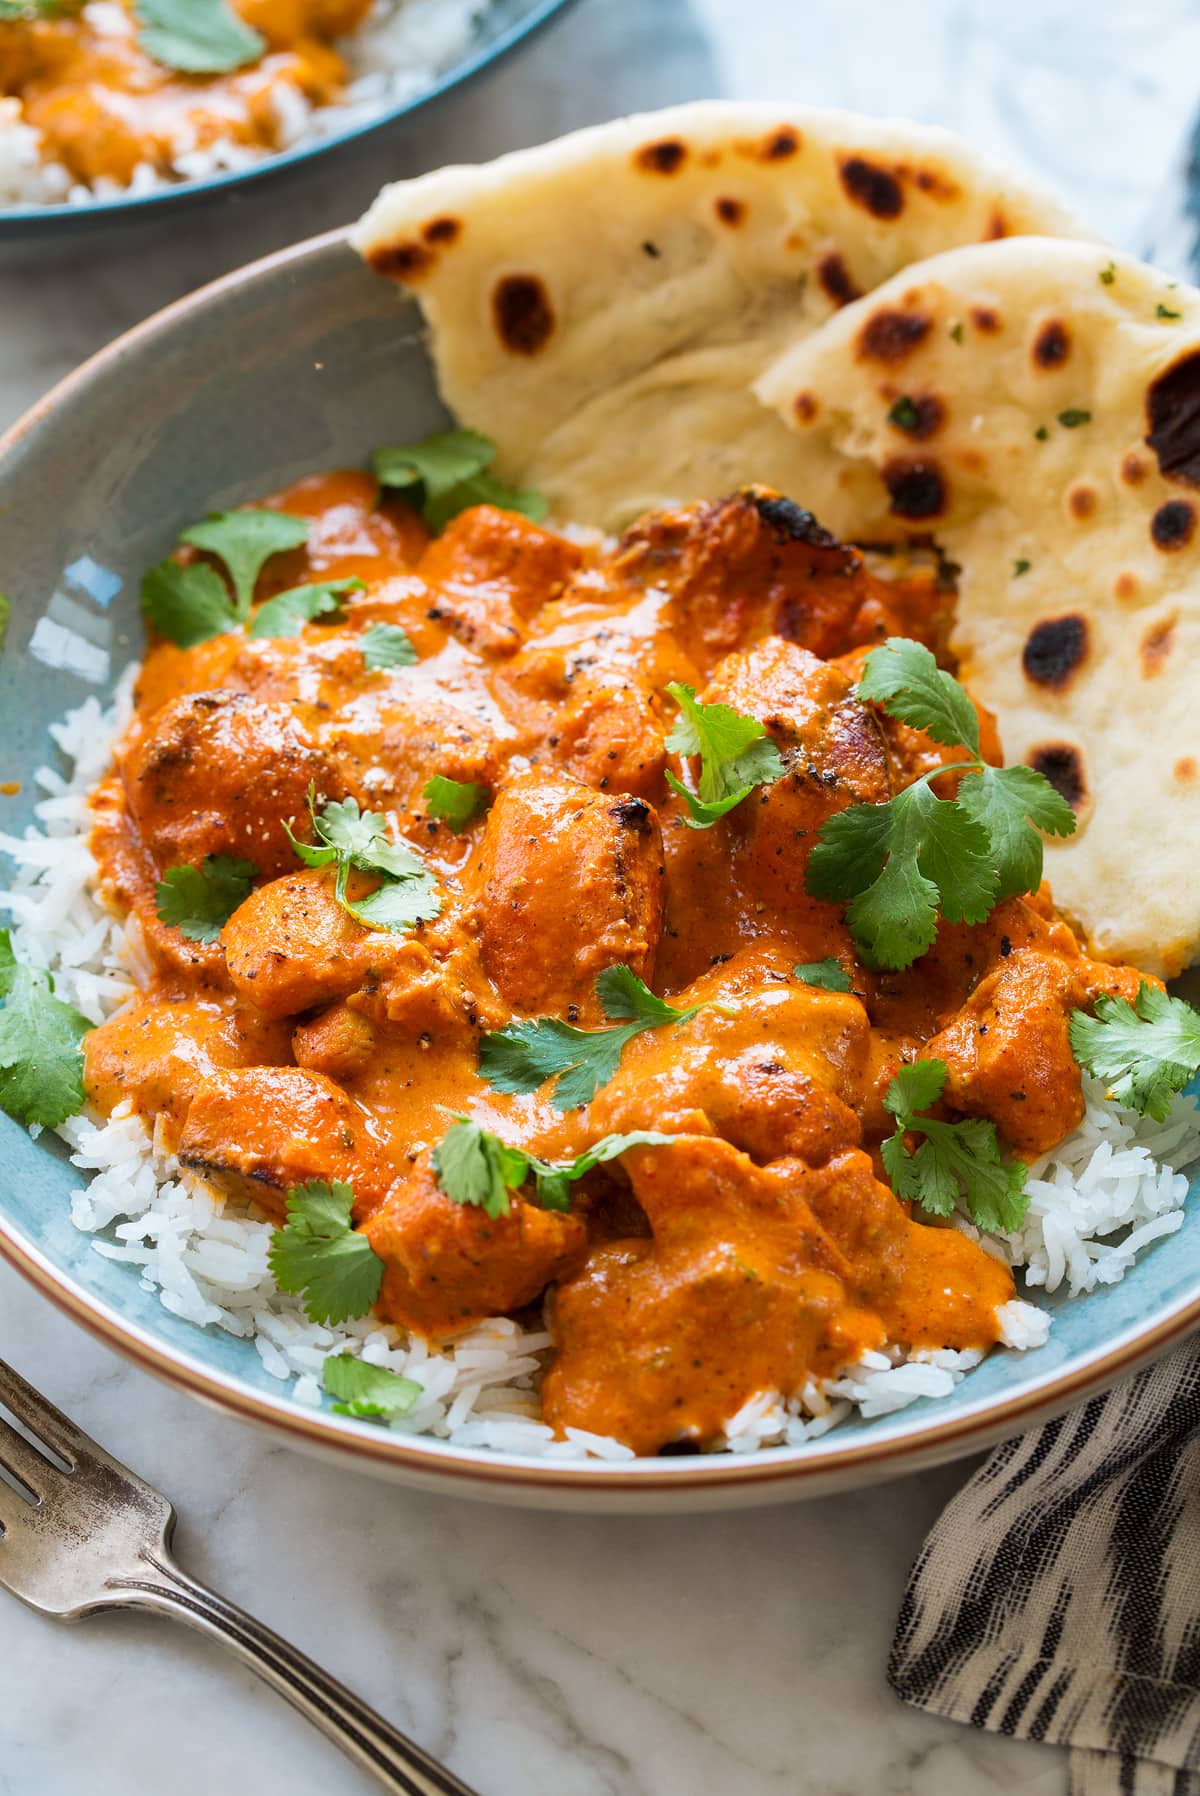 Steps to Prepare Indian Butter Chicken And Naan